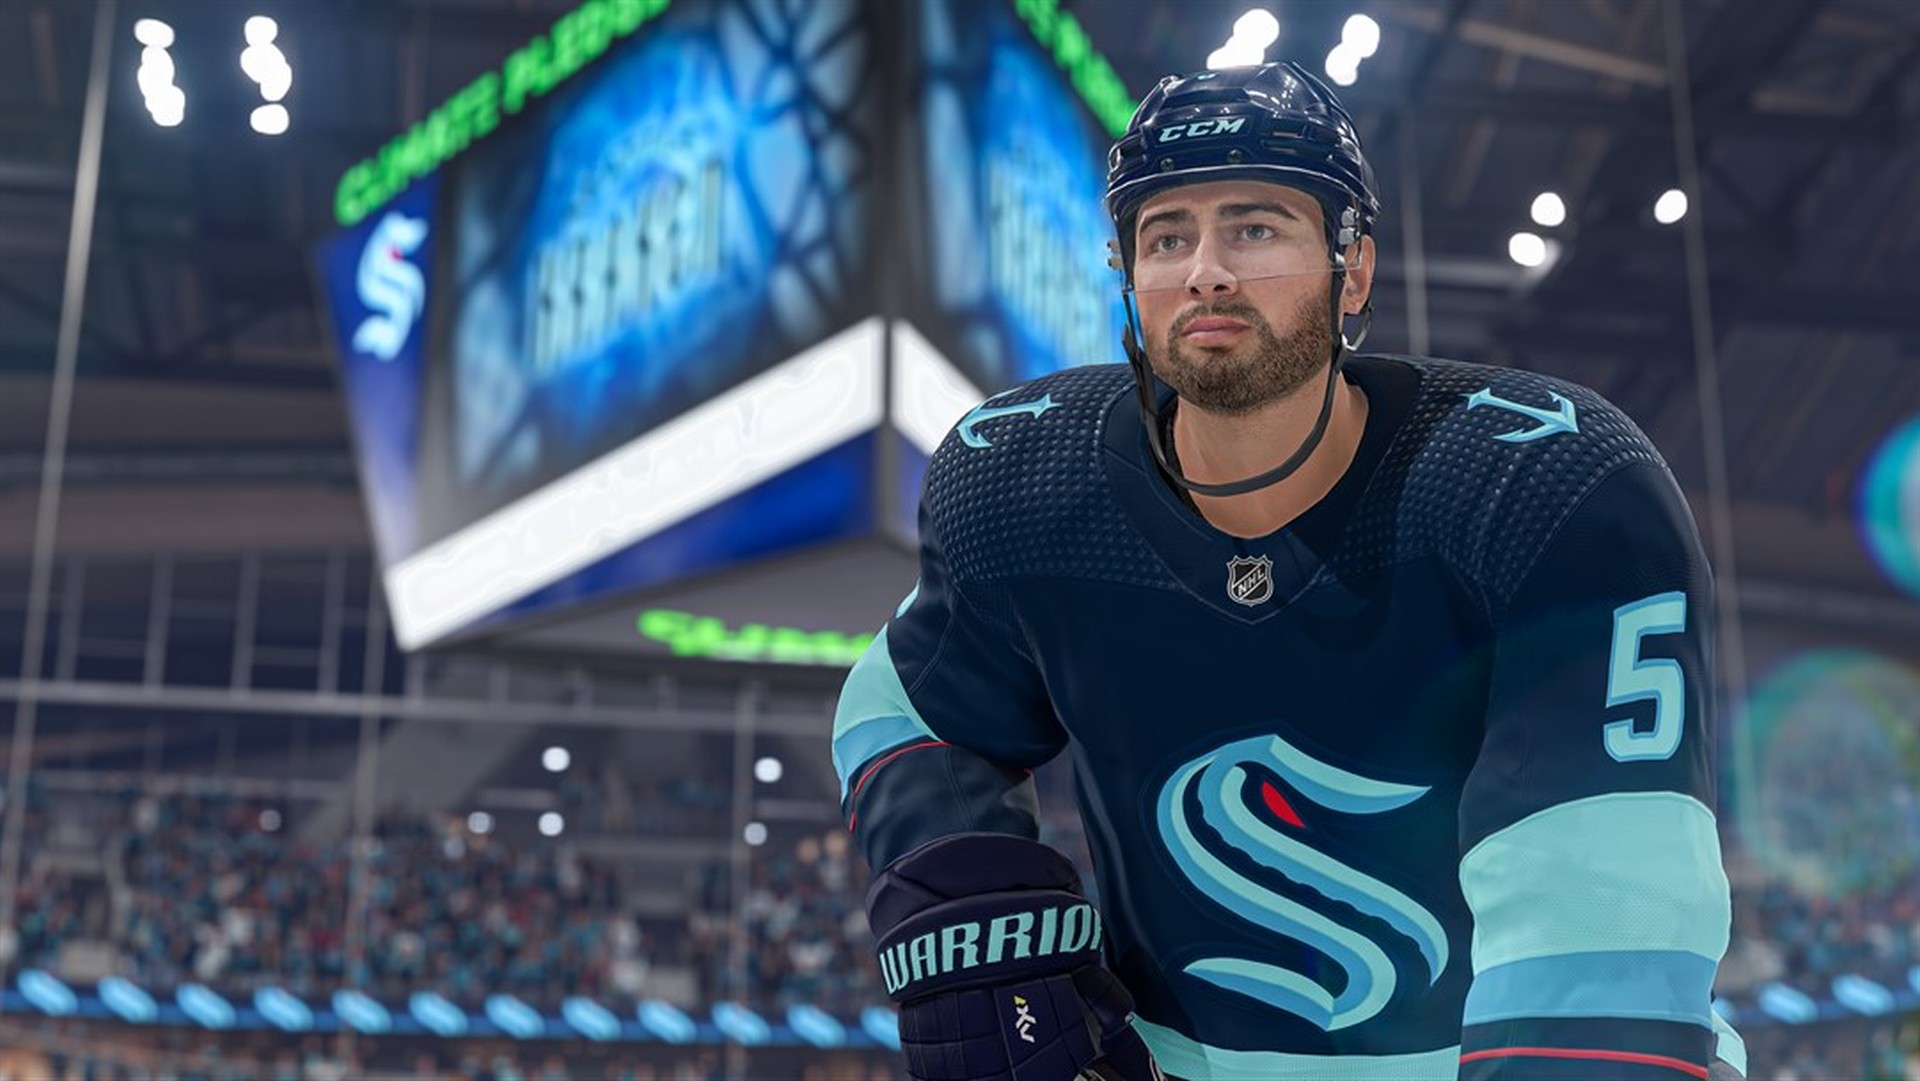 NHL 22 – October 15 – Optimized for Xbox Series X | S